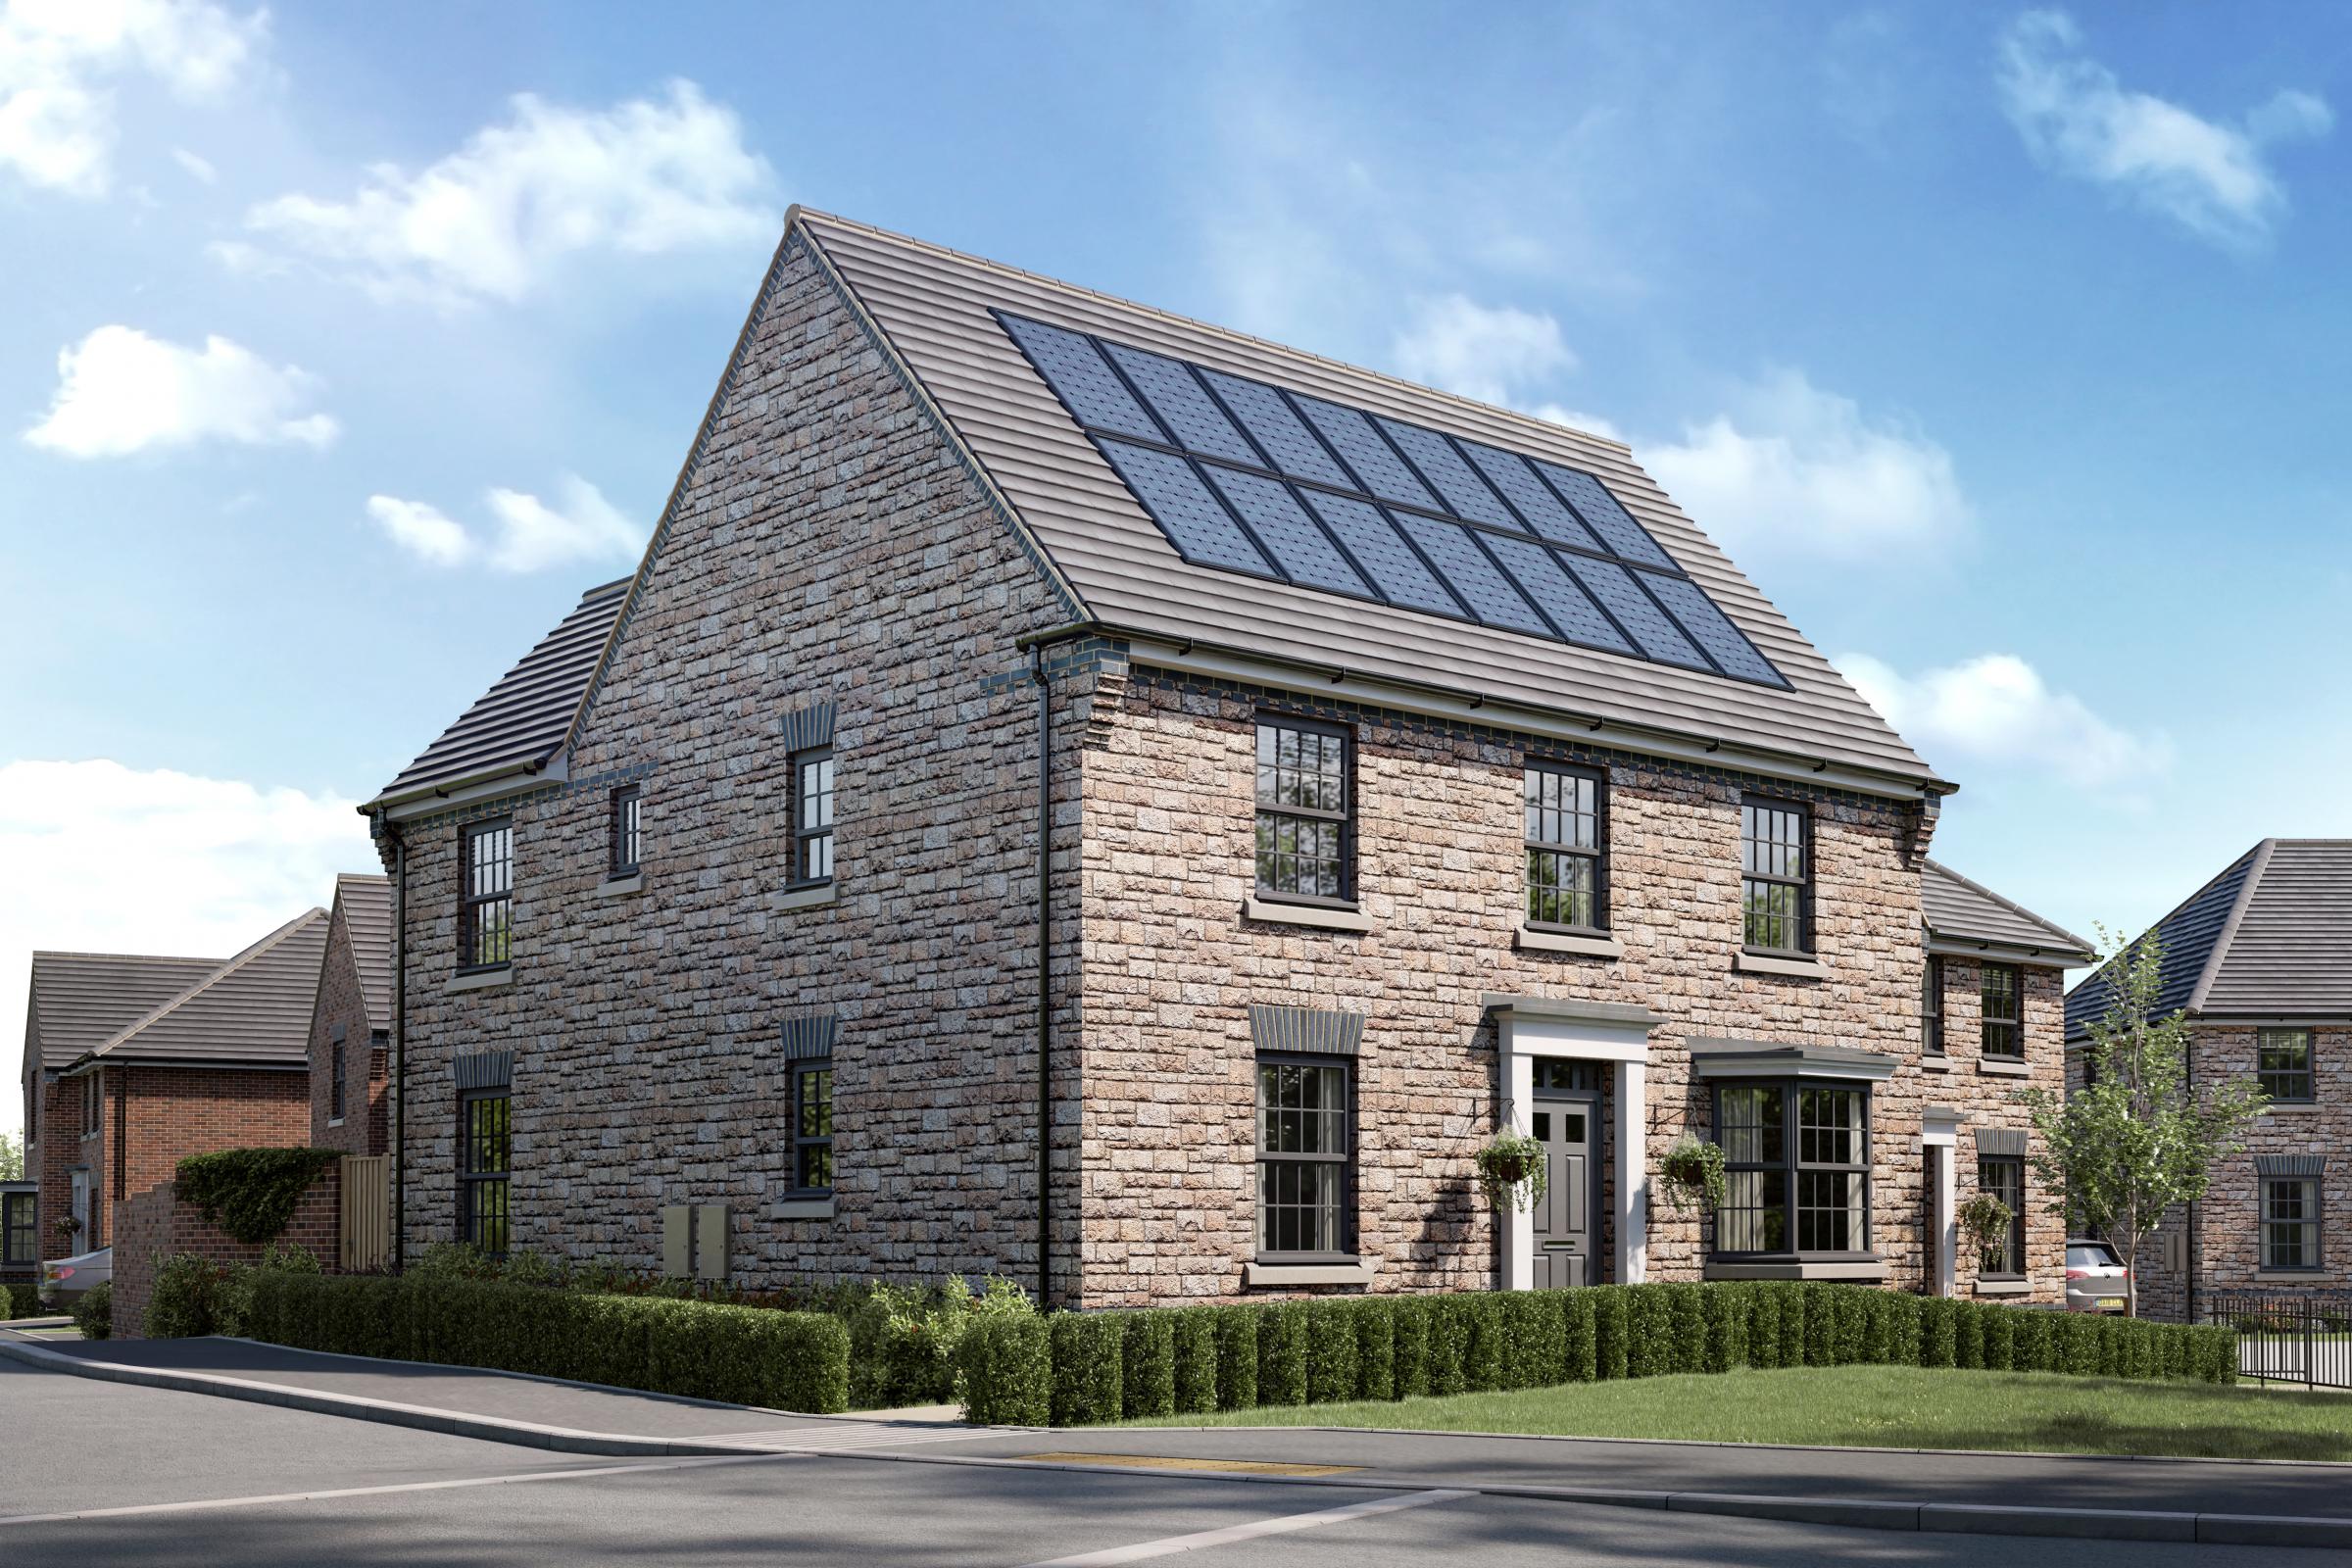 An artists impression of the new Avondale-style home